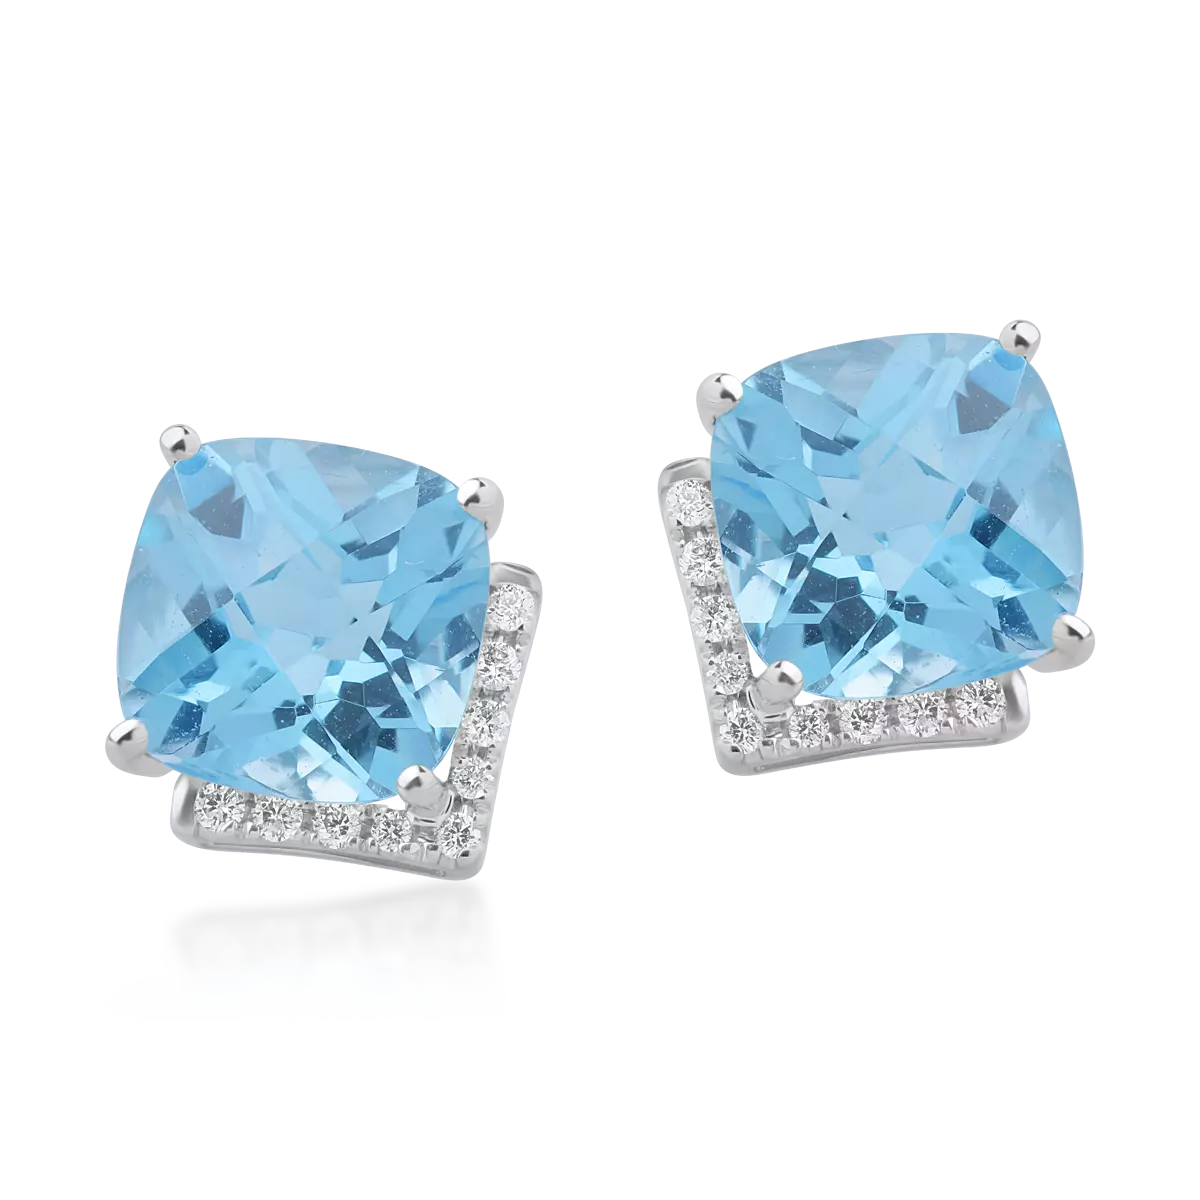 18K white gold earrings with 5ct blue topaz and 0.1ct diamonds